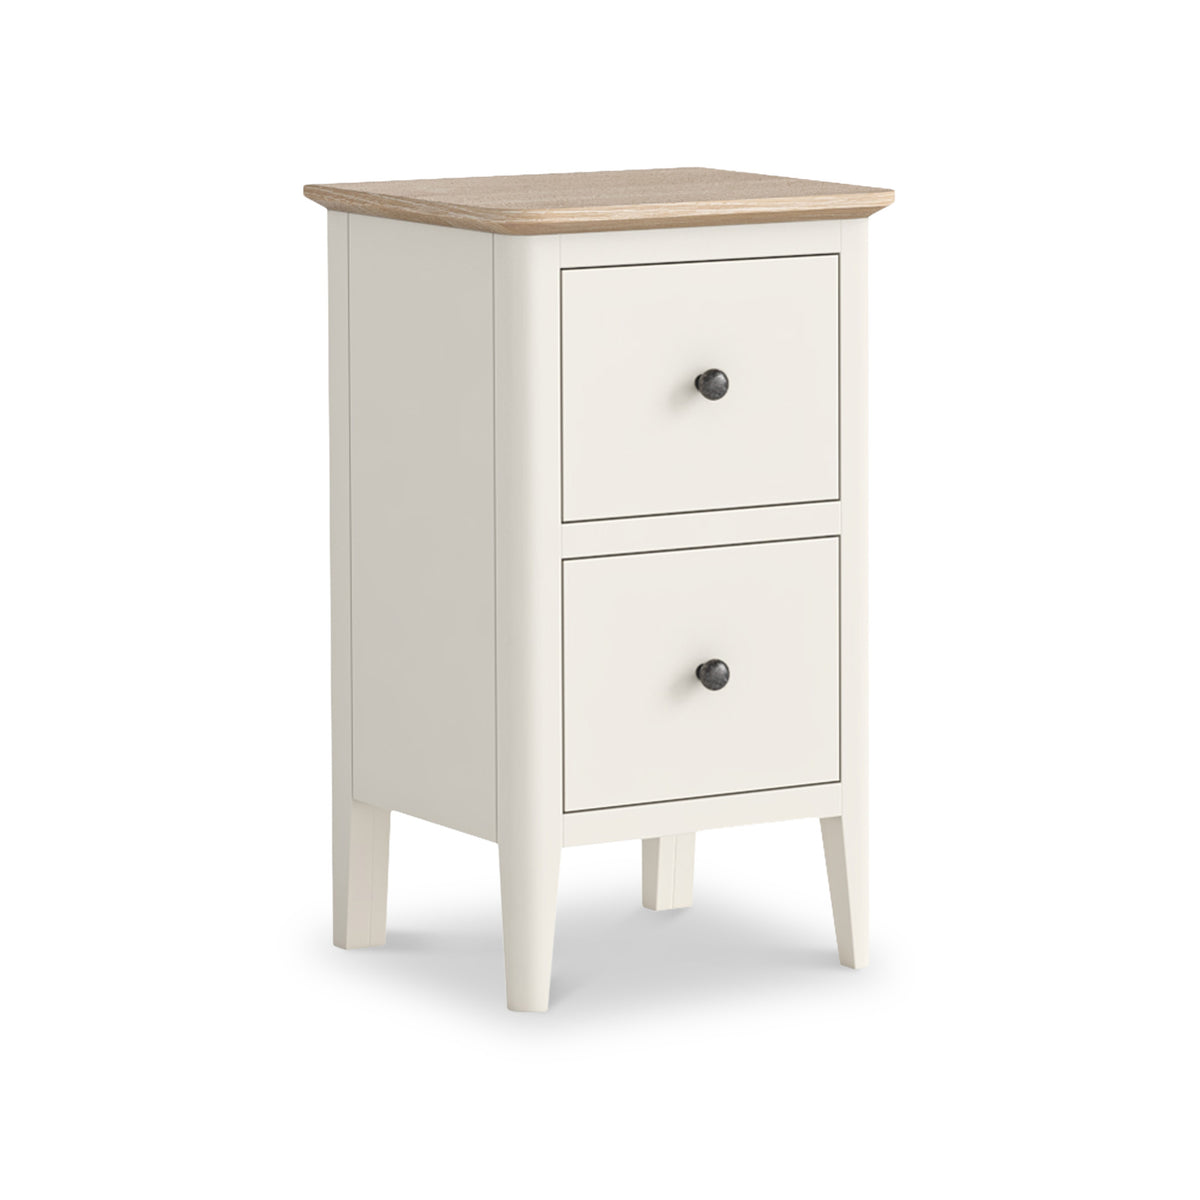 Penrose Coconut White Narrow Bedside Table with metal handles from Roseland Furniture